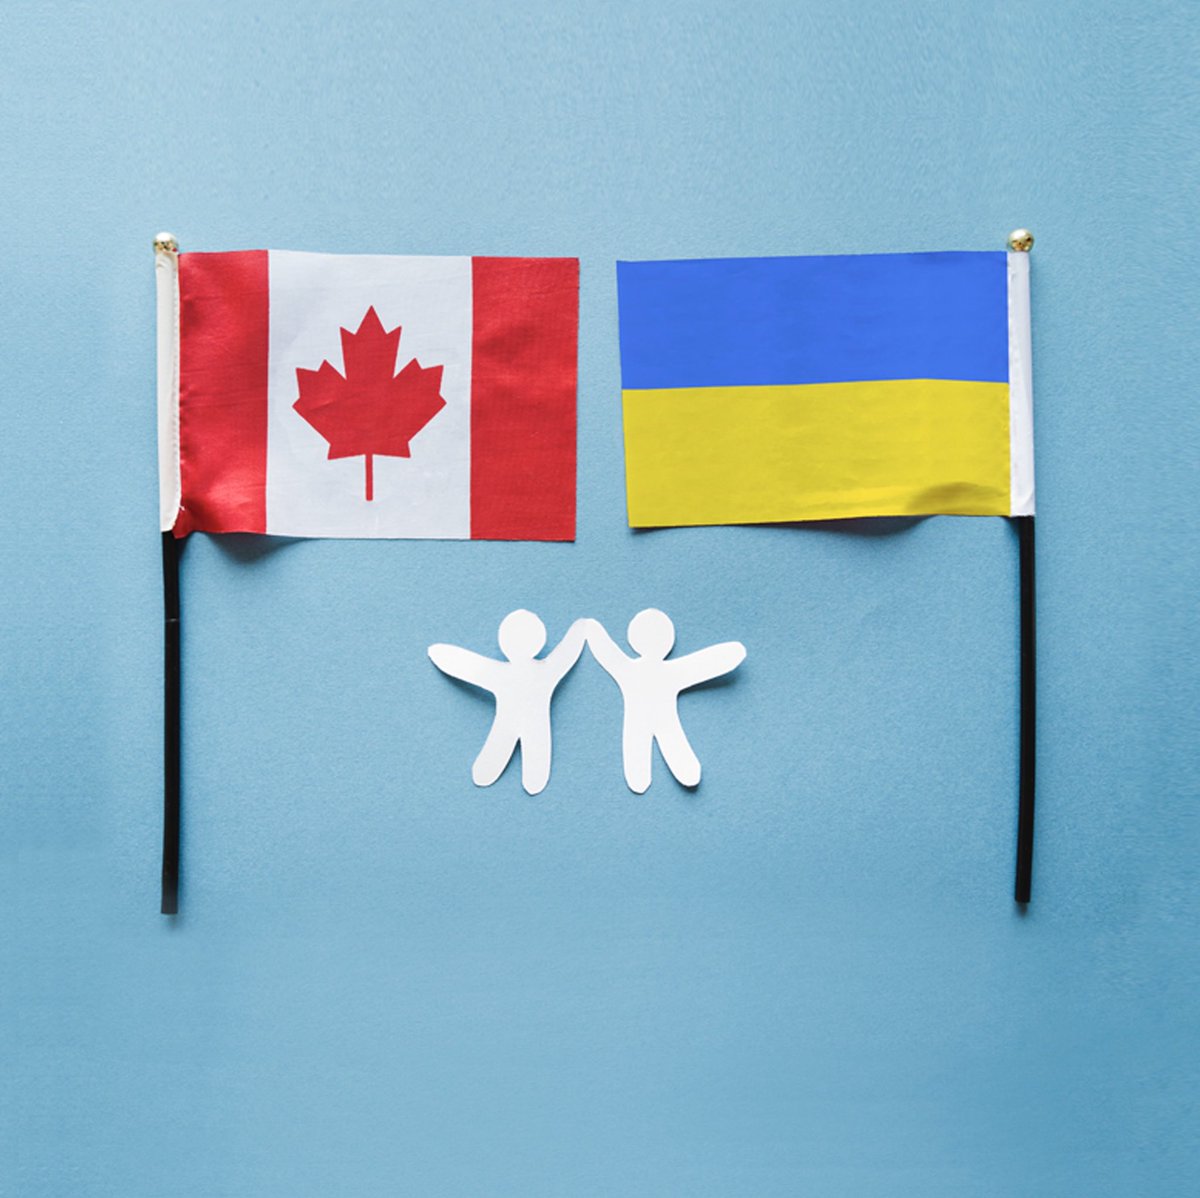 Ukrainian Parliament has just ratified the Audiovisual Coproduction Treaty with Canada! Just one more step, and we’ll witness many #creative projects born in #coproduction            #CdnFilm #CdnTalent #filmUA